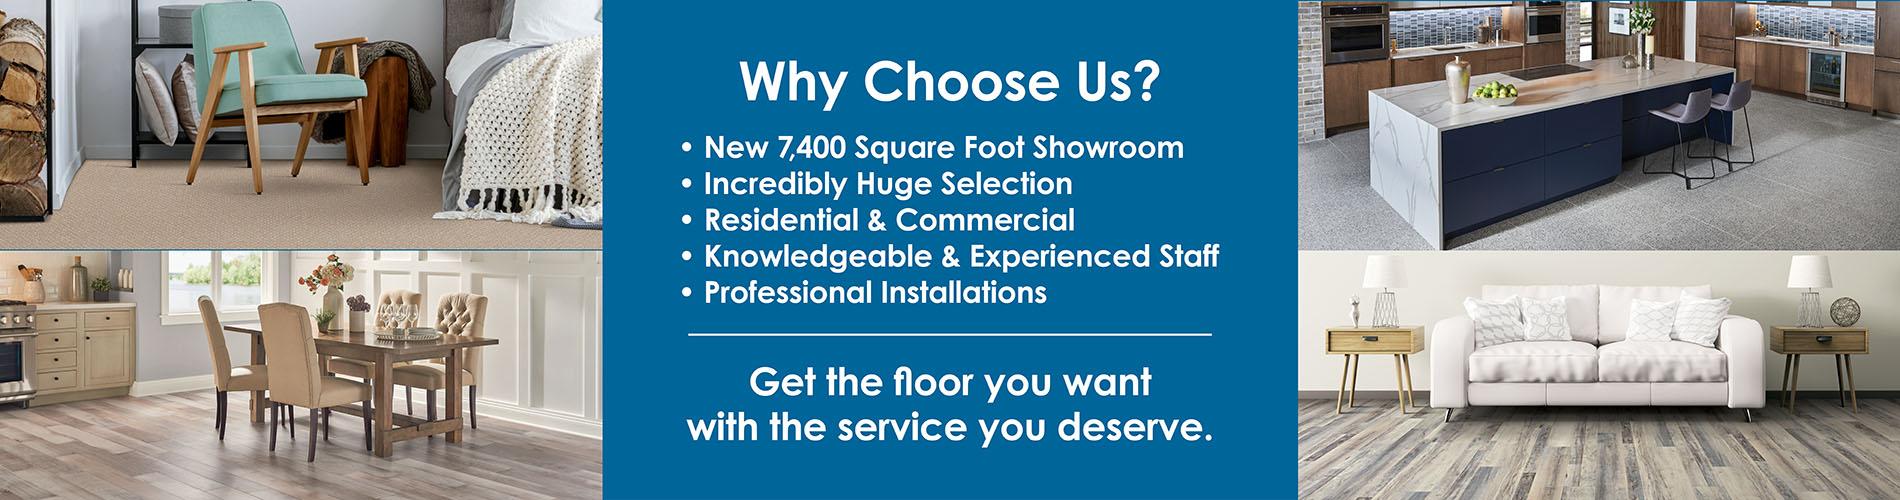 Why Choose Us? New 7,400 Square Foot Showroom - Incredibly Huge Selection - Residential & Commercial - Knowledgeable & Experienced Staff - Professional Installations